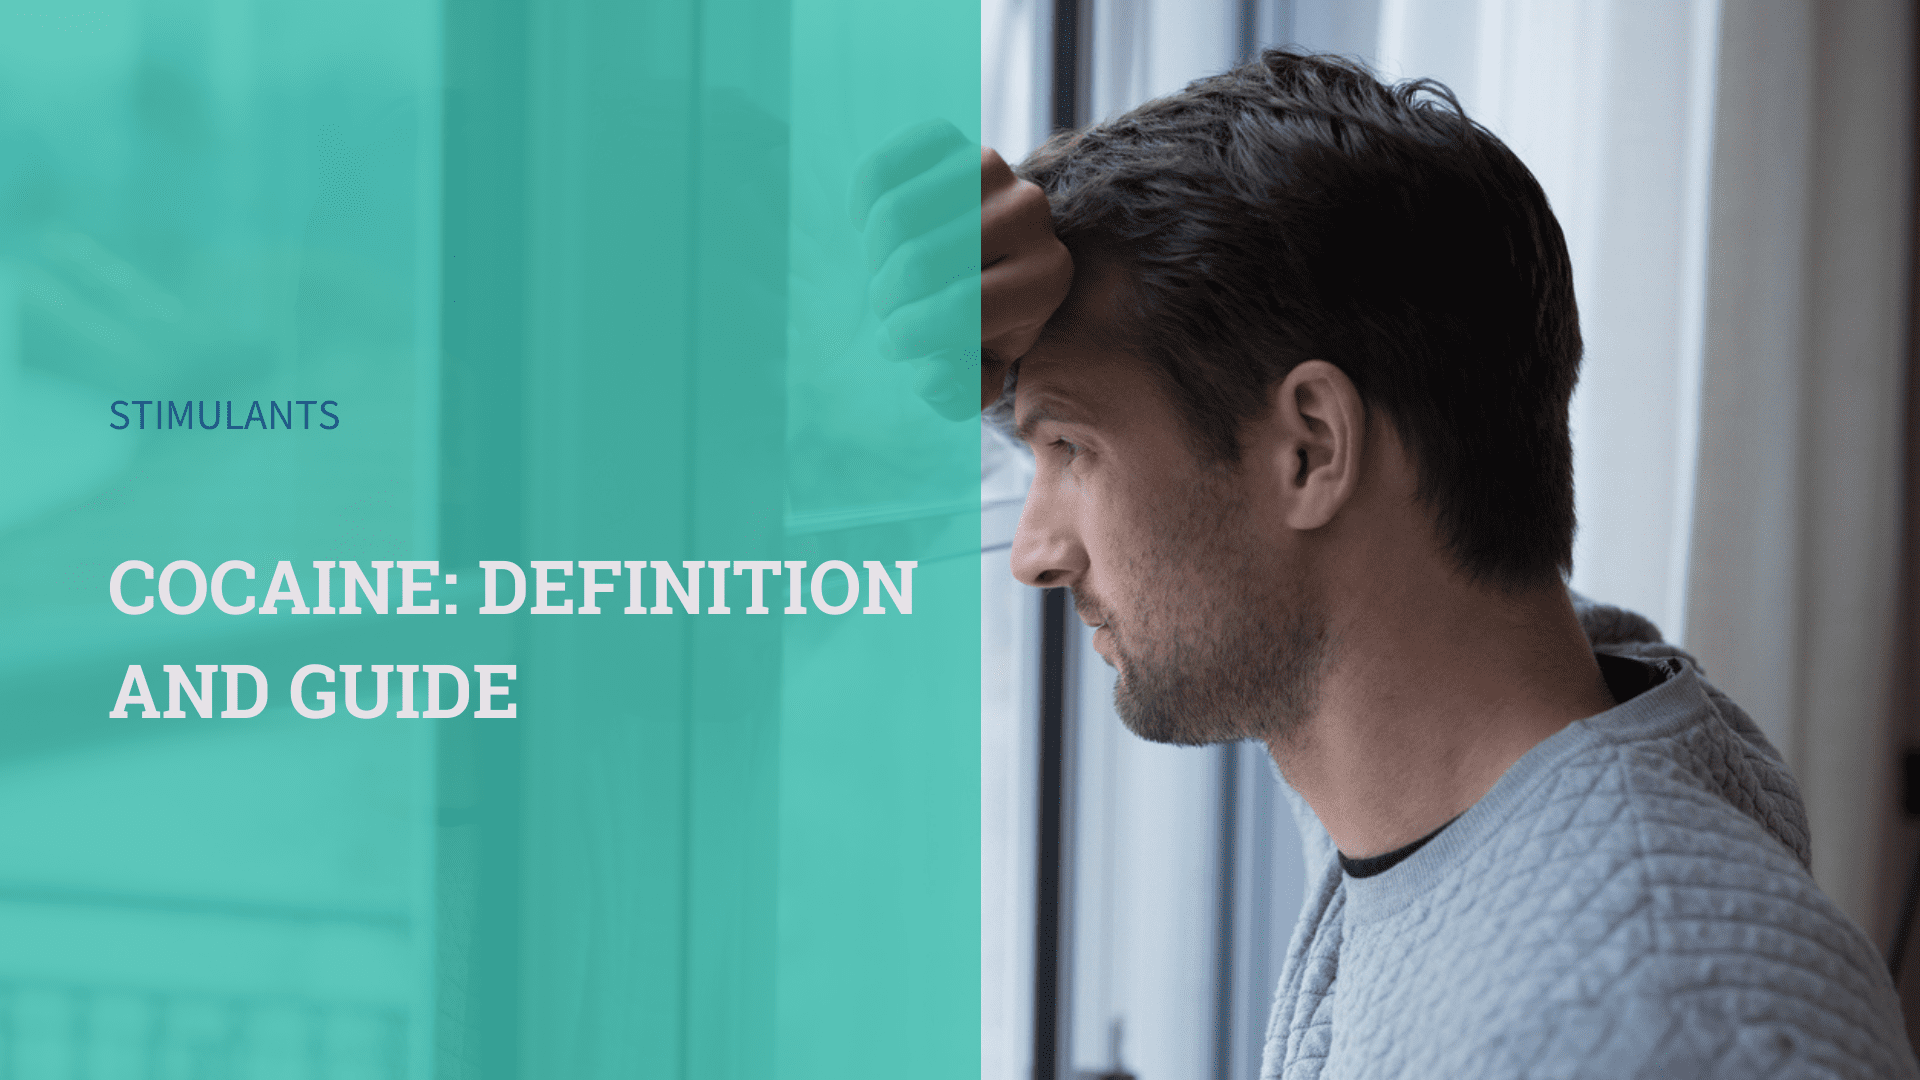 Cocaine Definition and Guide (1)